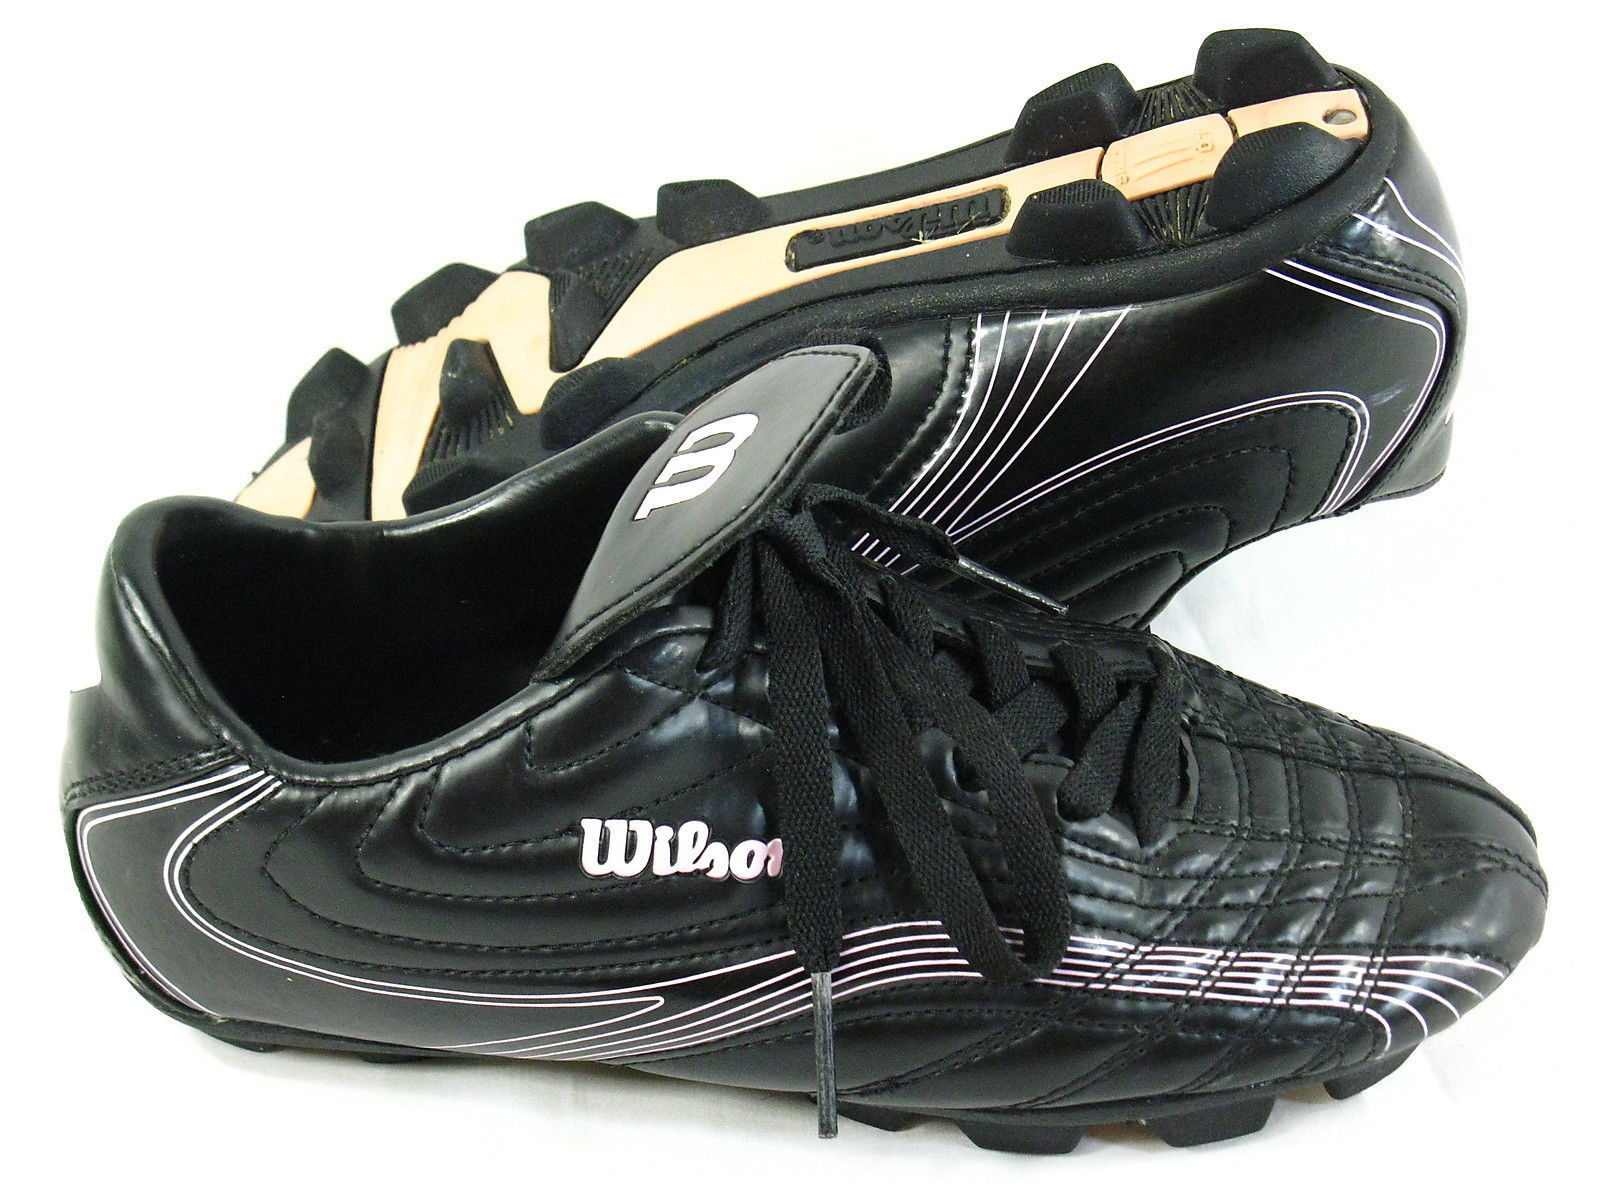 Wilson Soccer Cleats Youth Girls Size 5 US Black Pink Excellent - $7.63